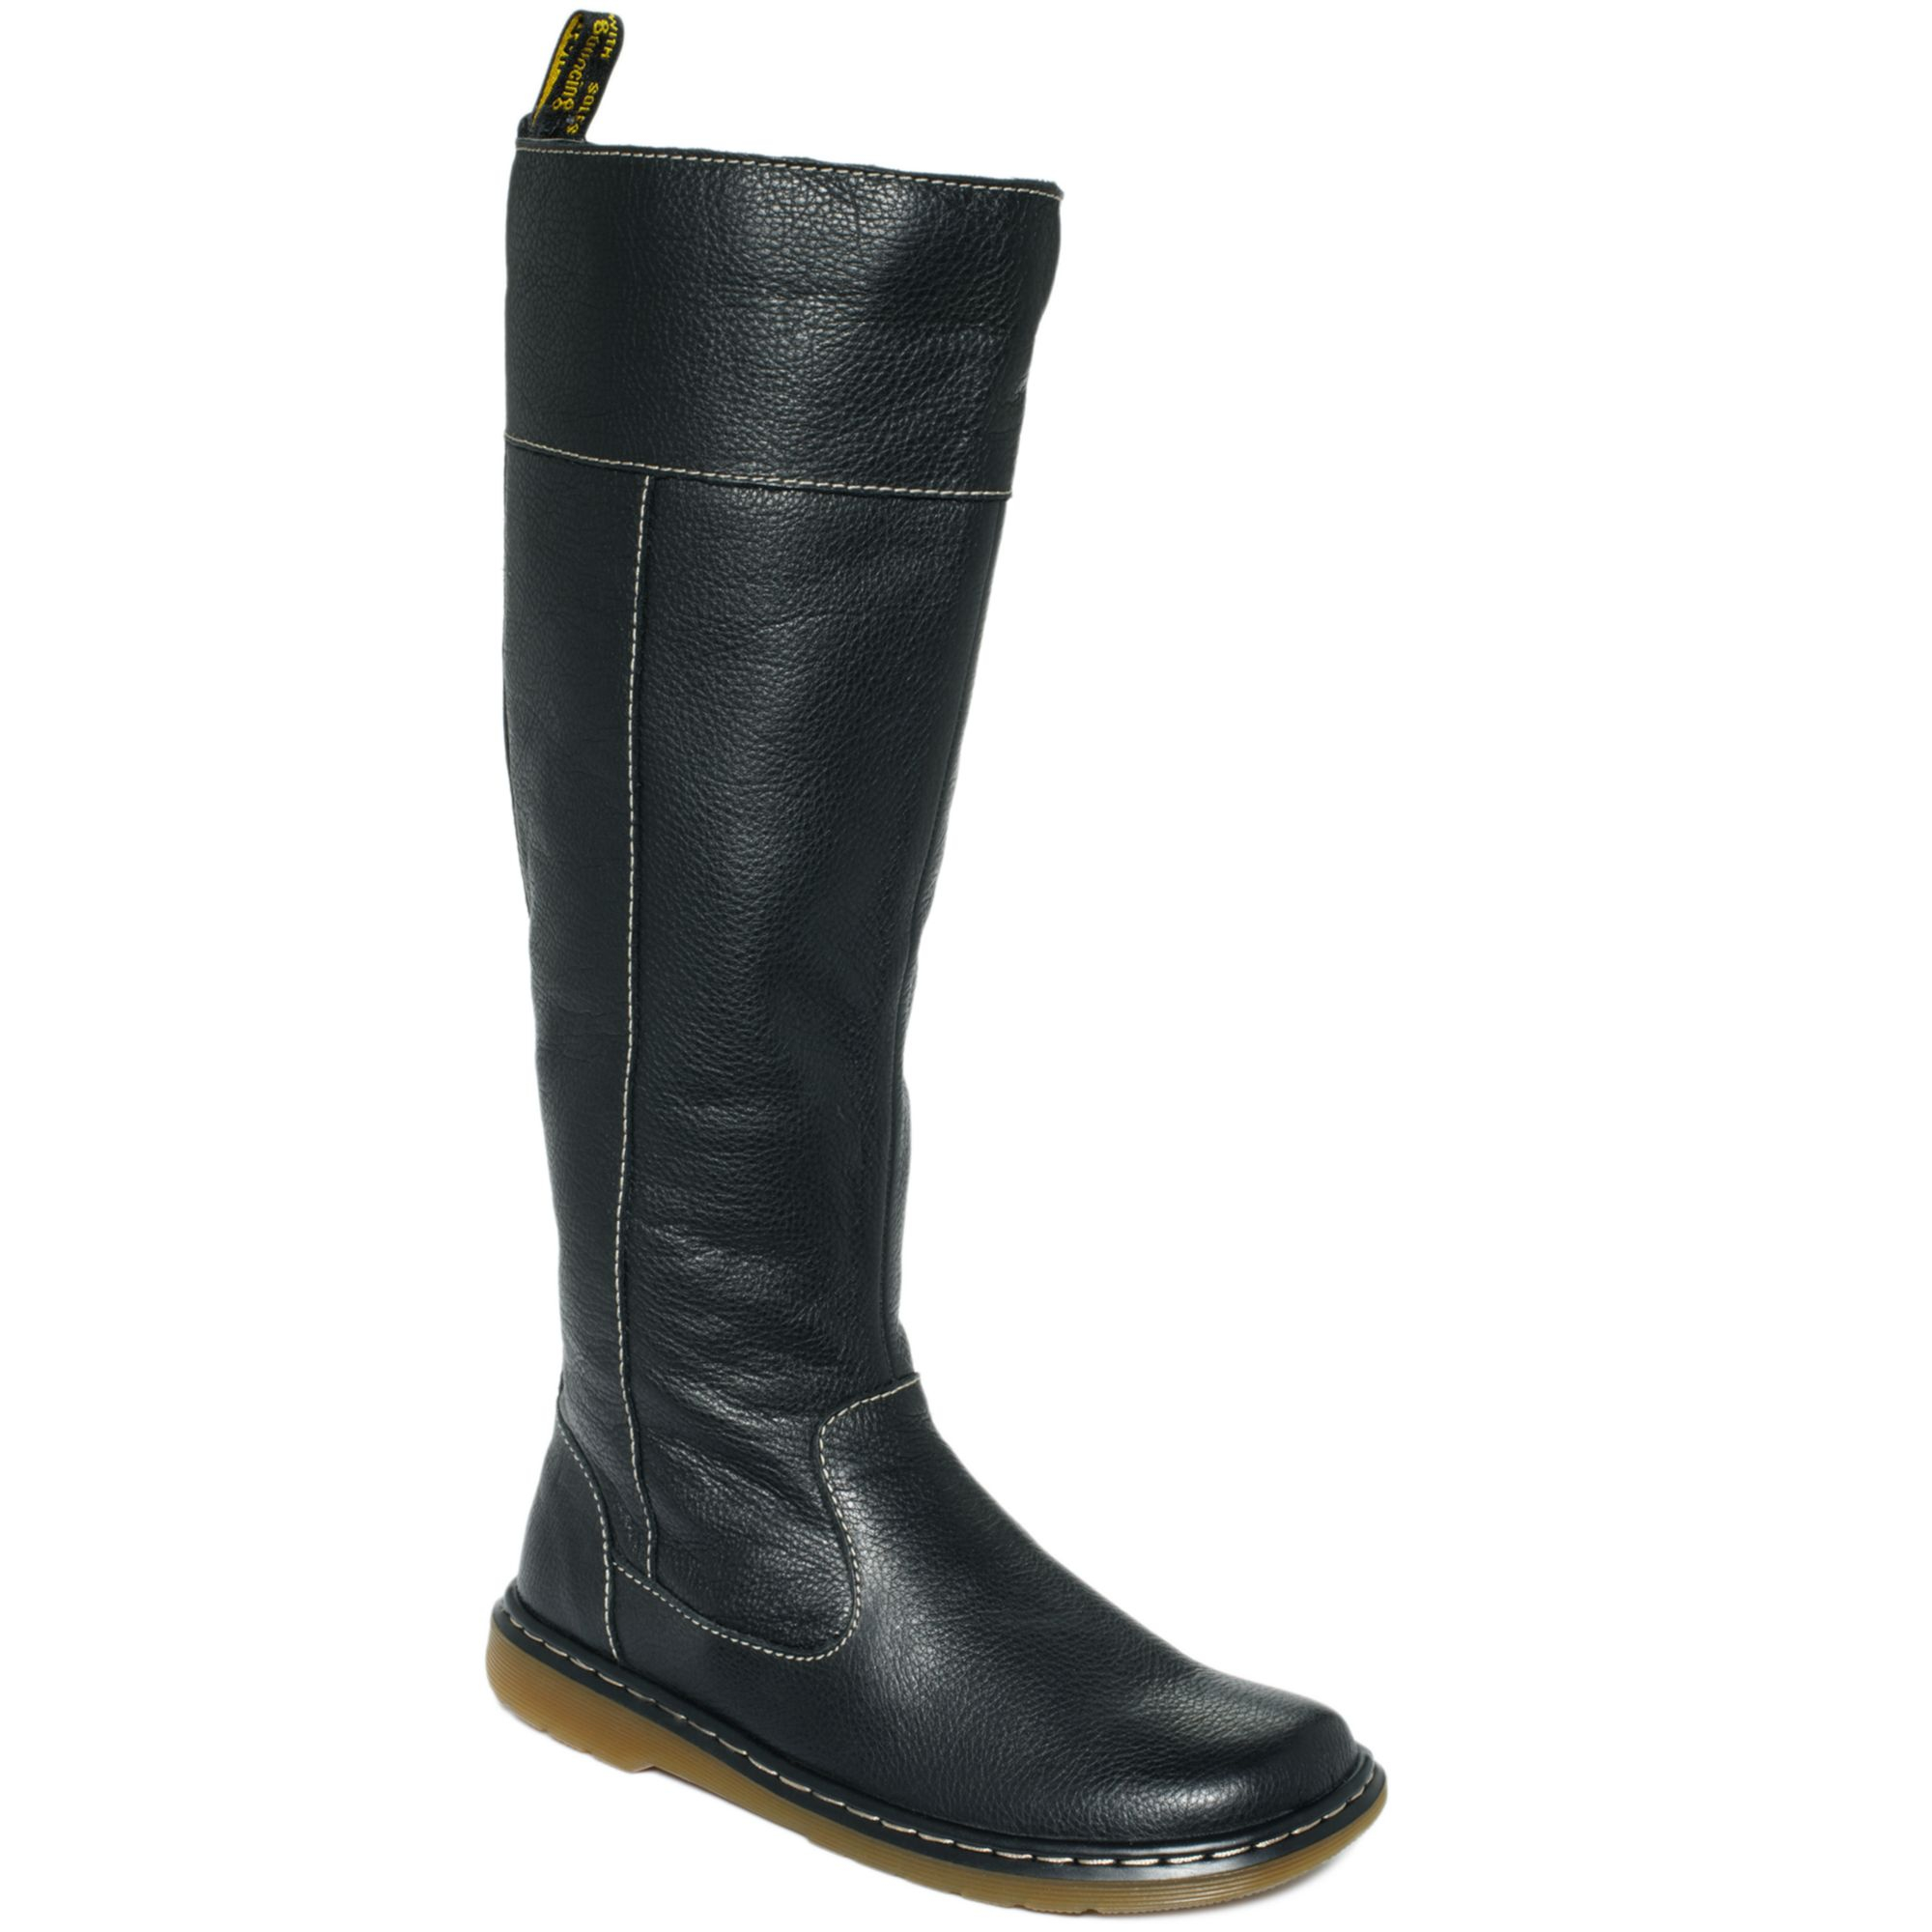 Lyst - Dr. Martens Haley Tall Boots in Black